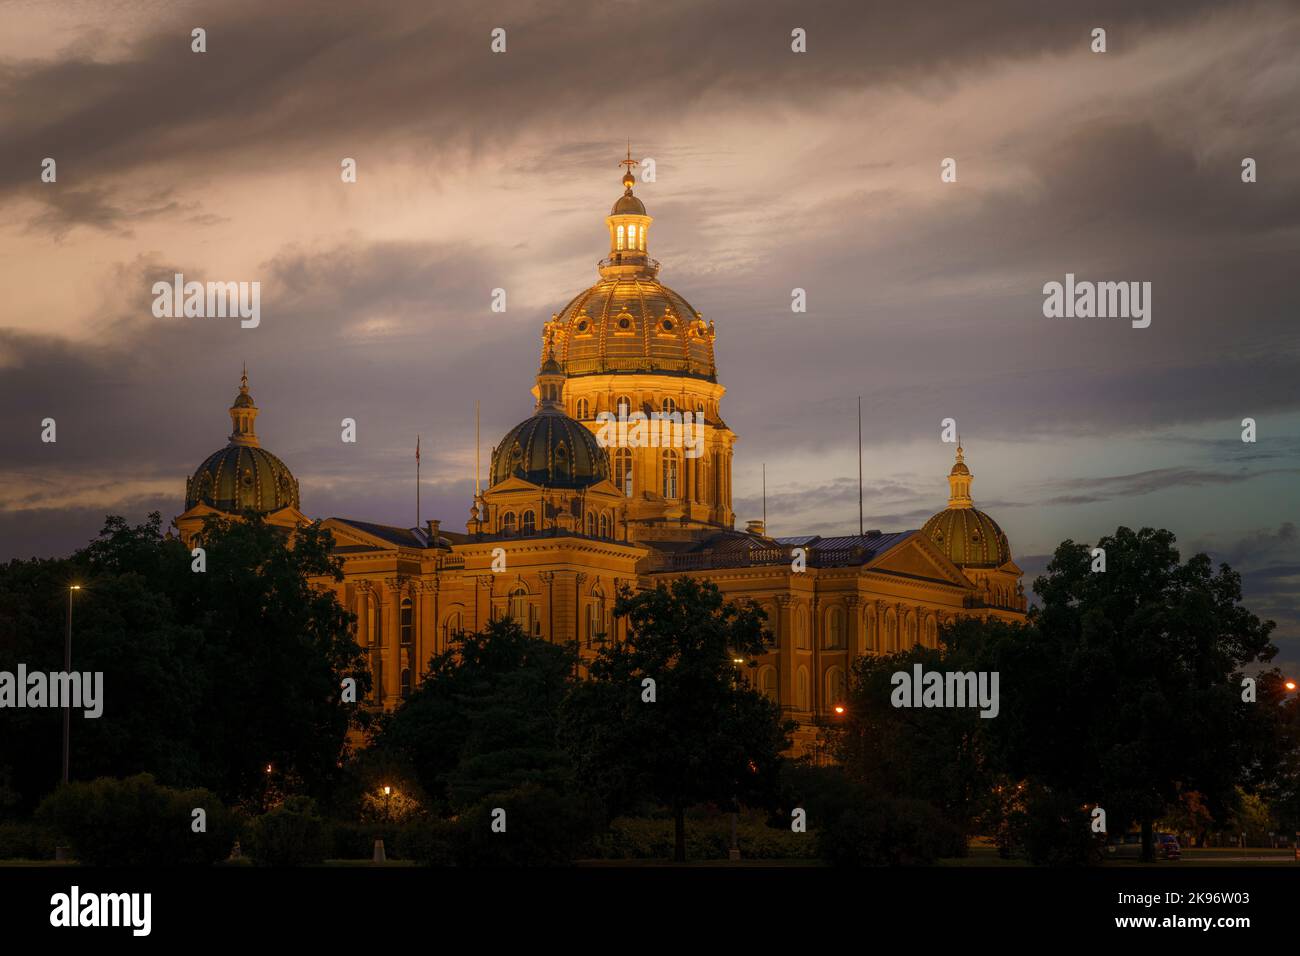 The Iowa State Capitol building in Des Moines, USA Stock Photo